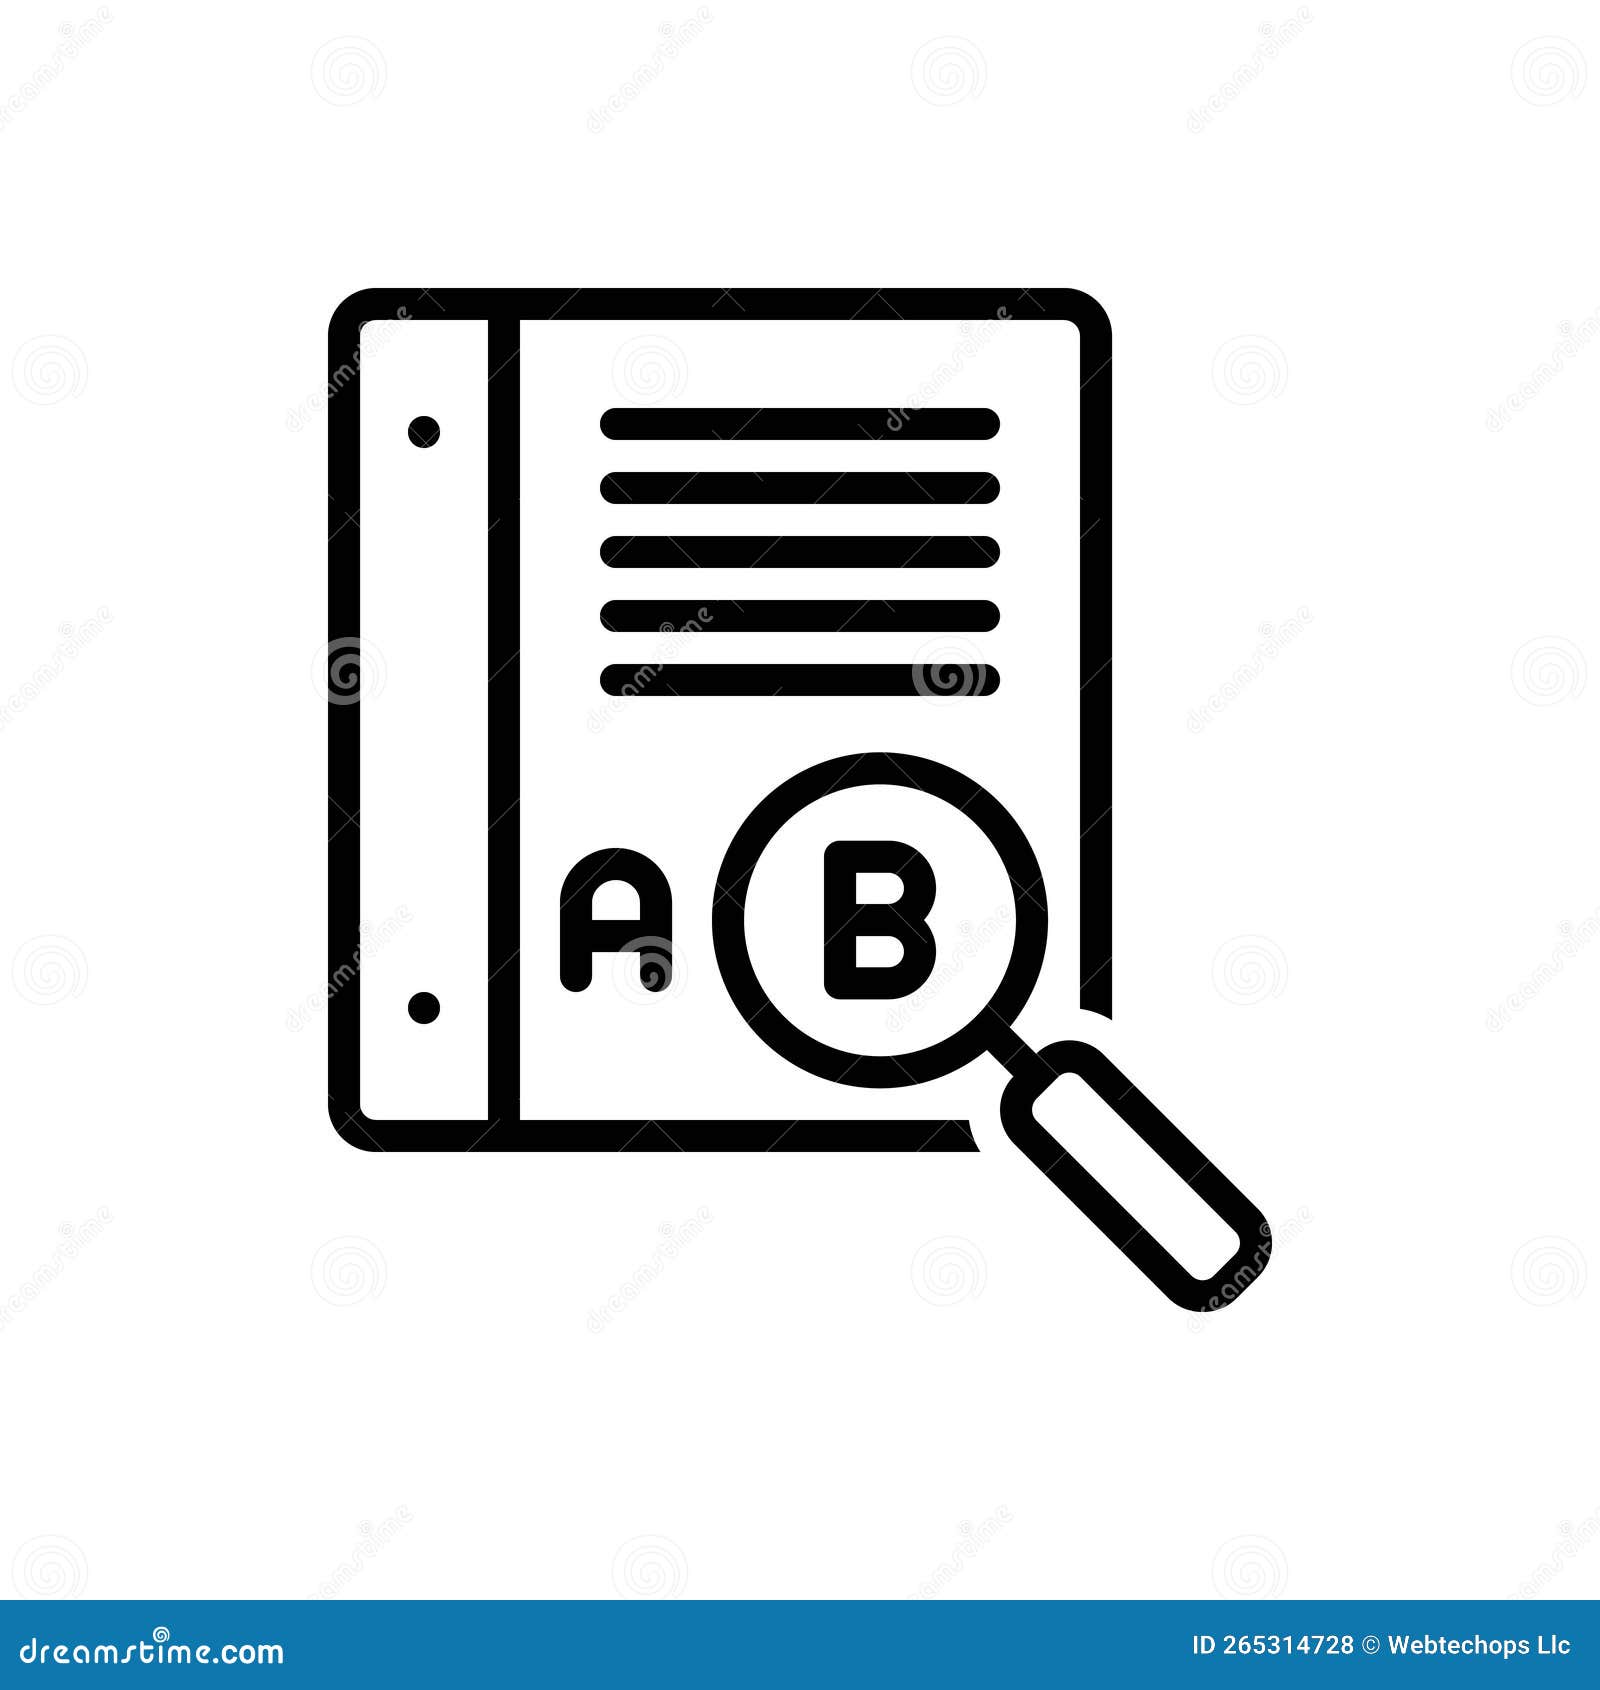 black line icon for thesaurus, word book and dictionary